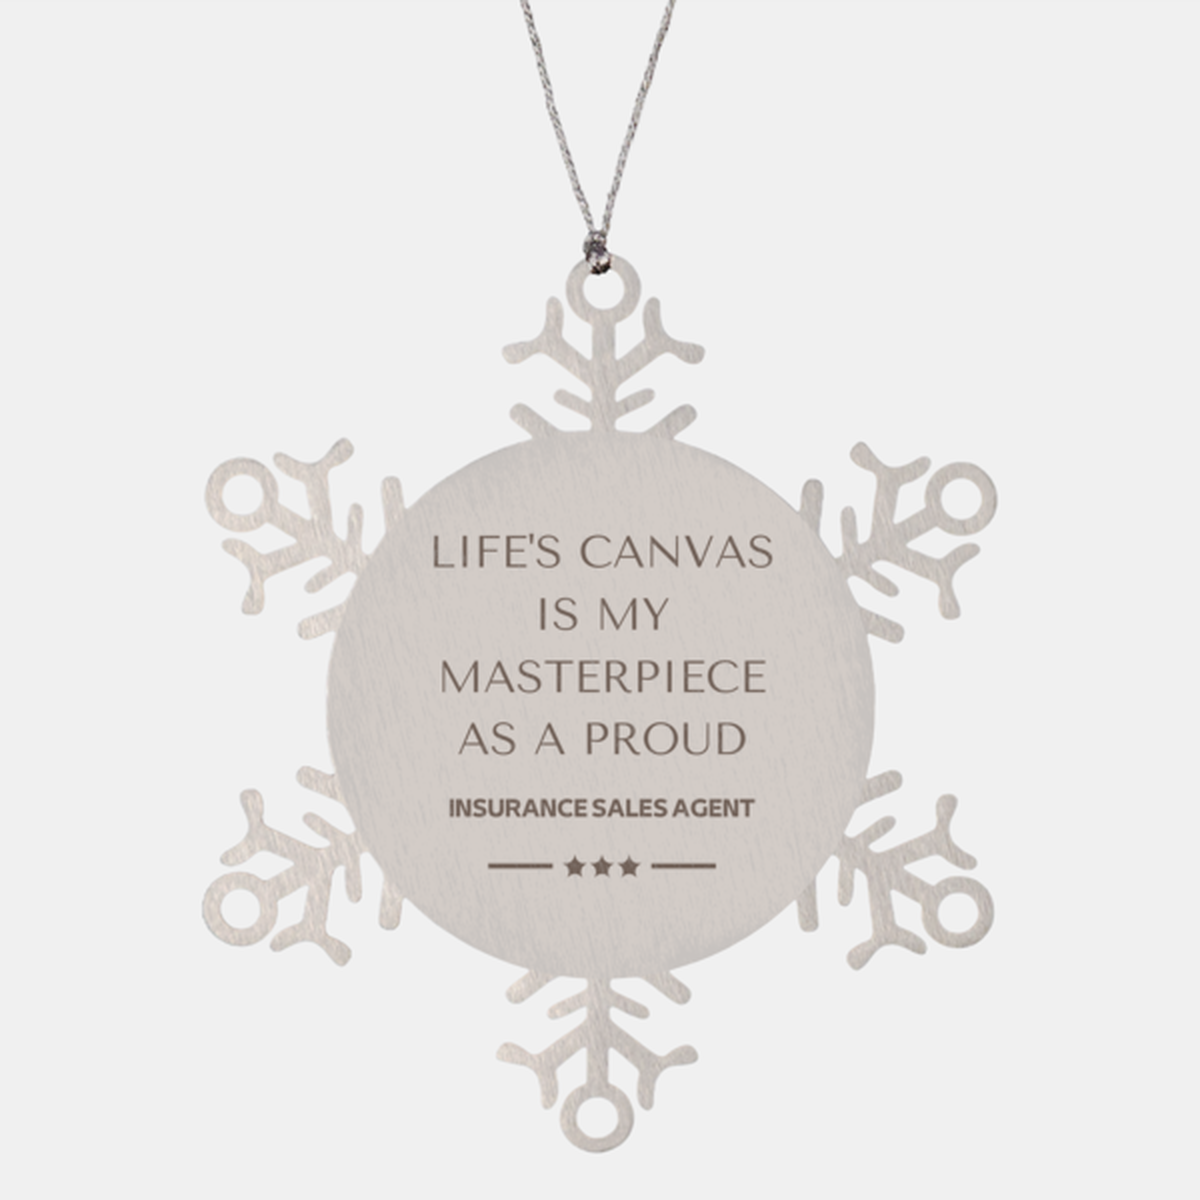 Proud Insurance Sales Agent Gifts, Life's canvas is my masterpiece, Epic Birthday Christmas Unique Snowflake Ornament For Insurance Sales Agent, Coworkers, Men, Women, Friends